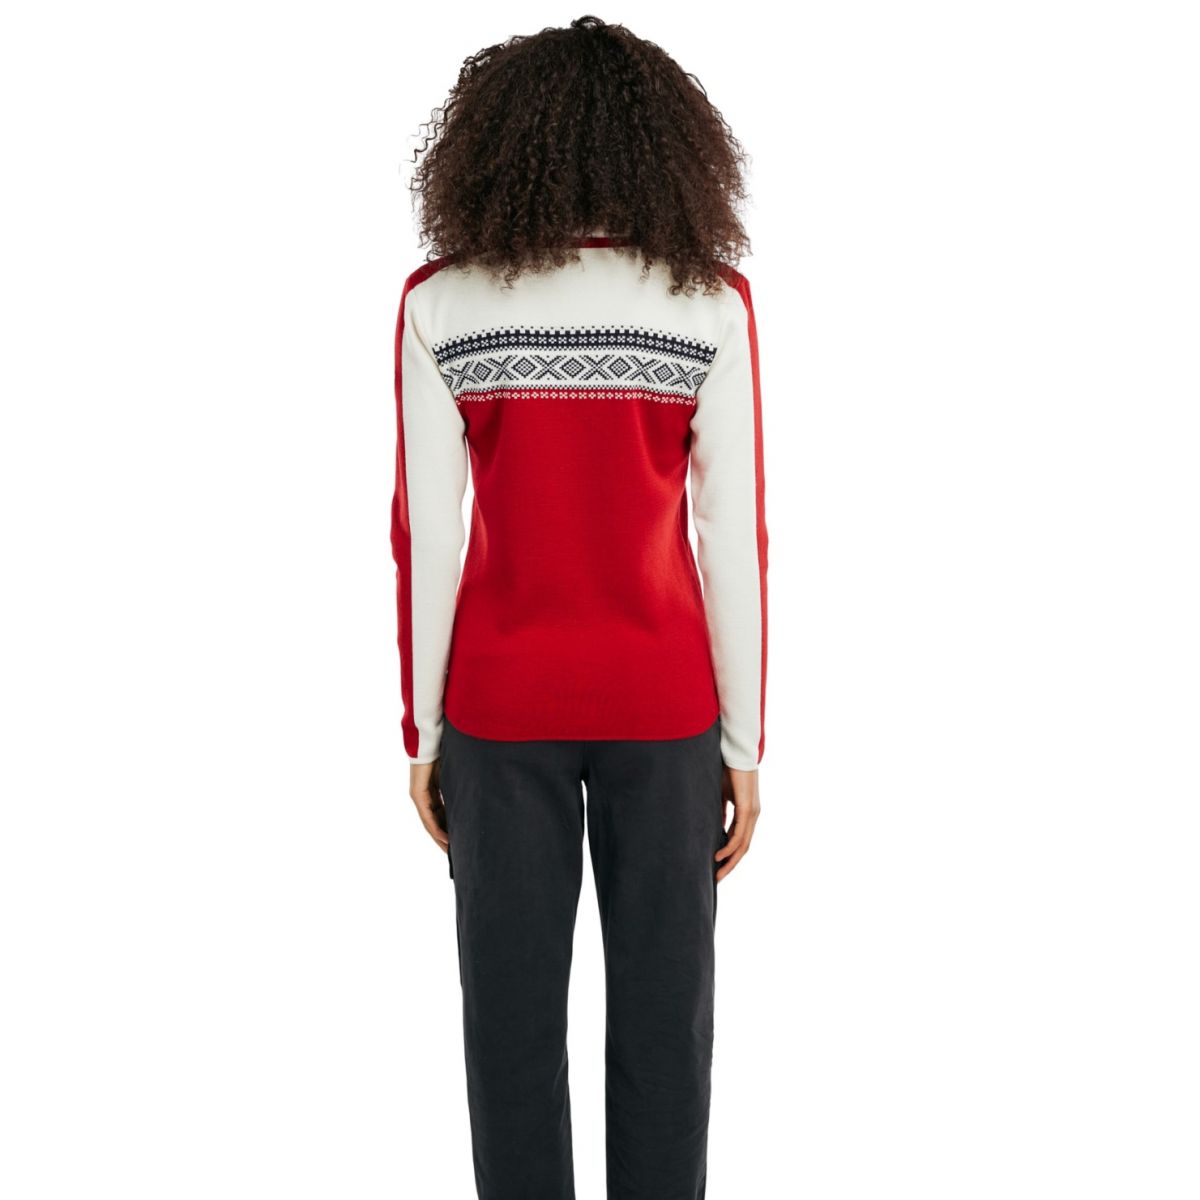 Dale of Norway Dystingen, sweater, dames, rood